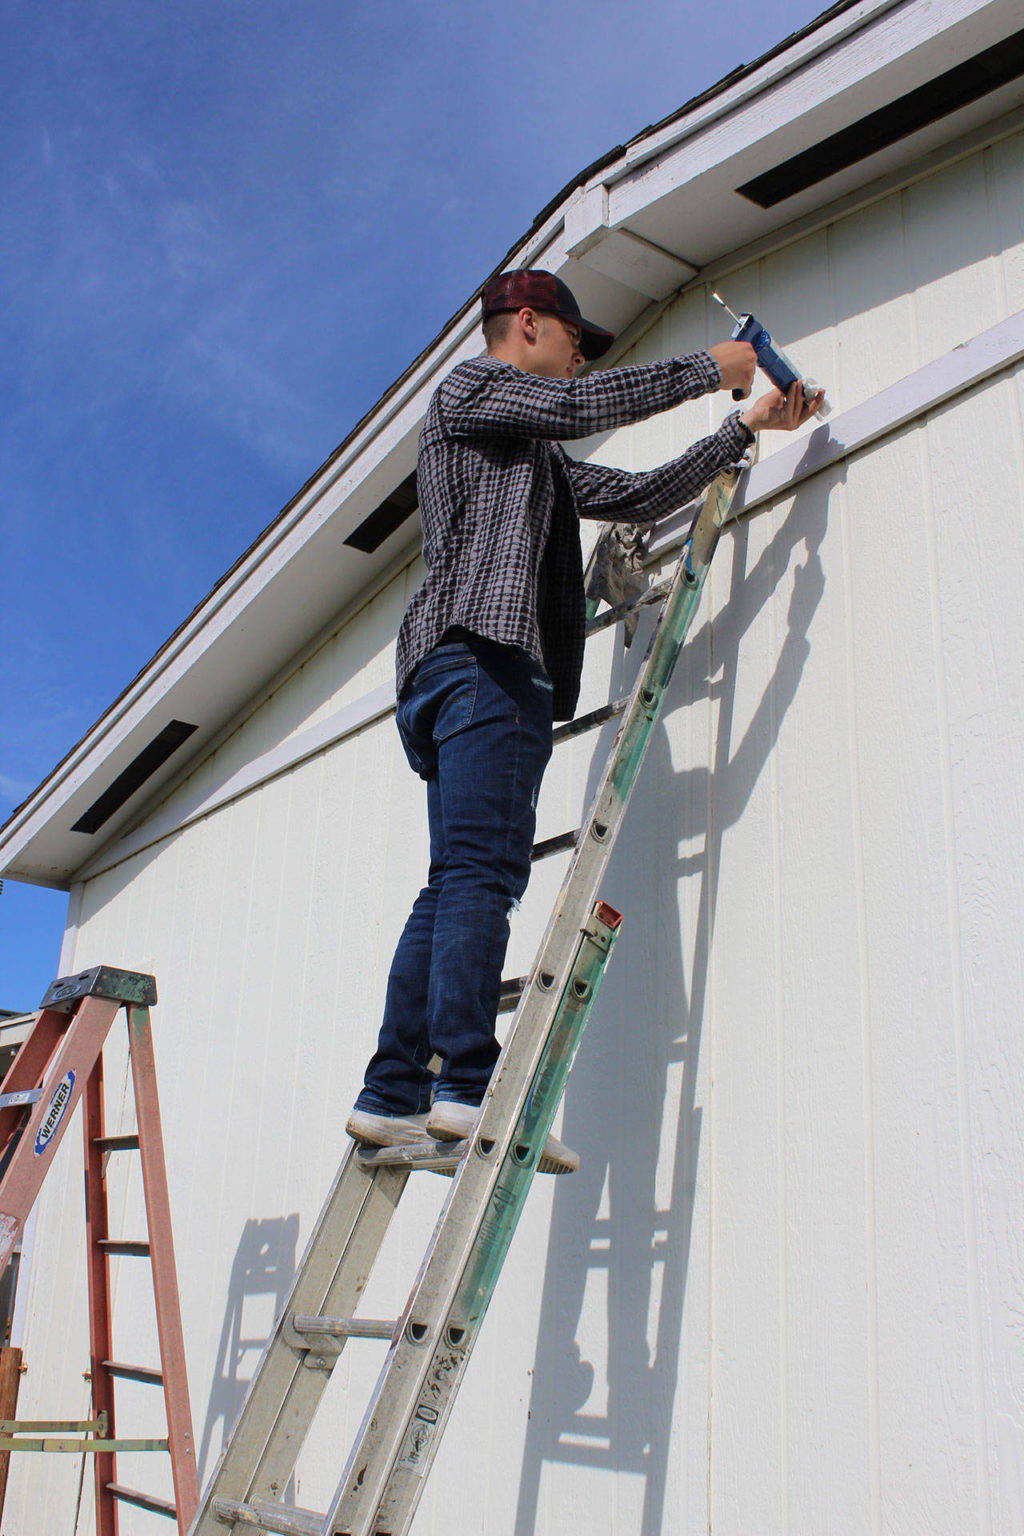 Photo by Patricia Guthrie/Whidbey News-Times. Cameron Toomey-Stout helped weatherproof a house during last year’s Central Whidbey Hearts Hammers Work Day.